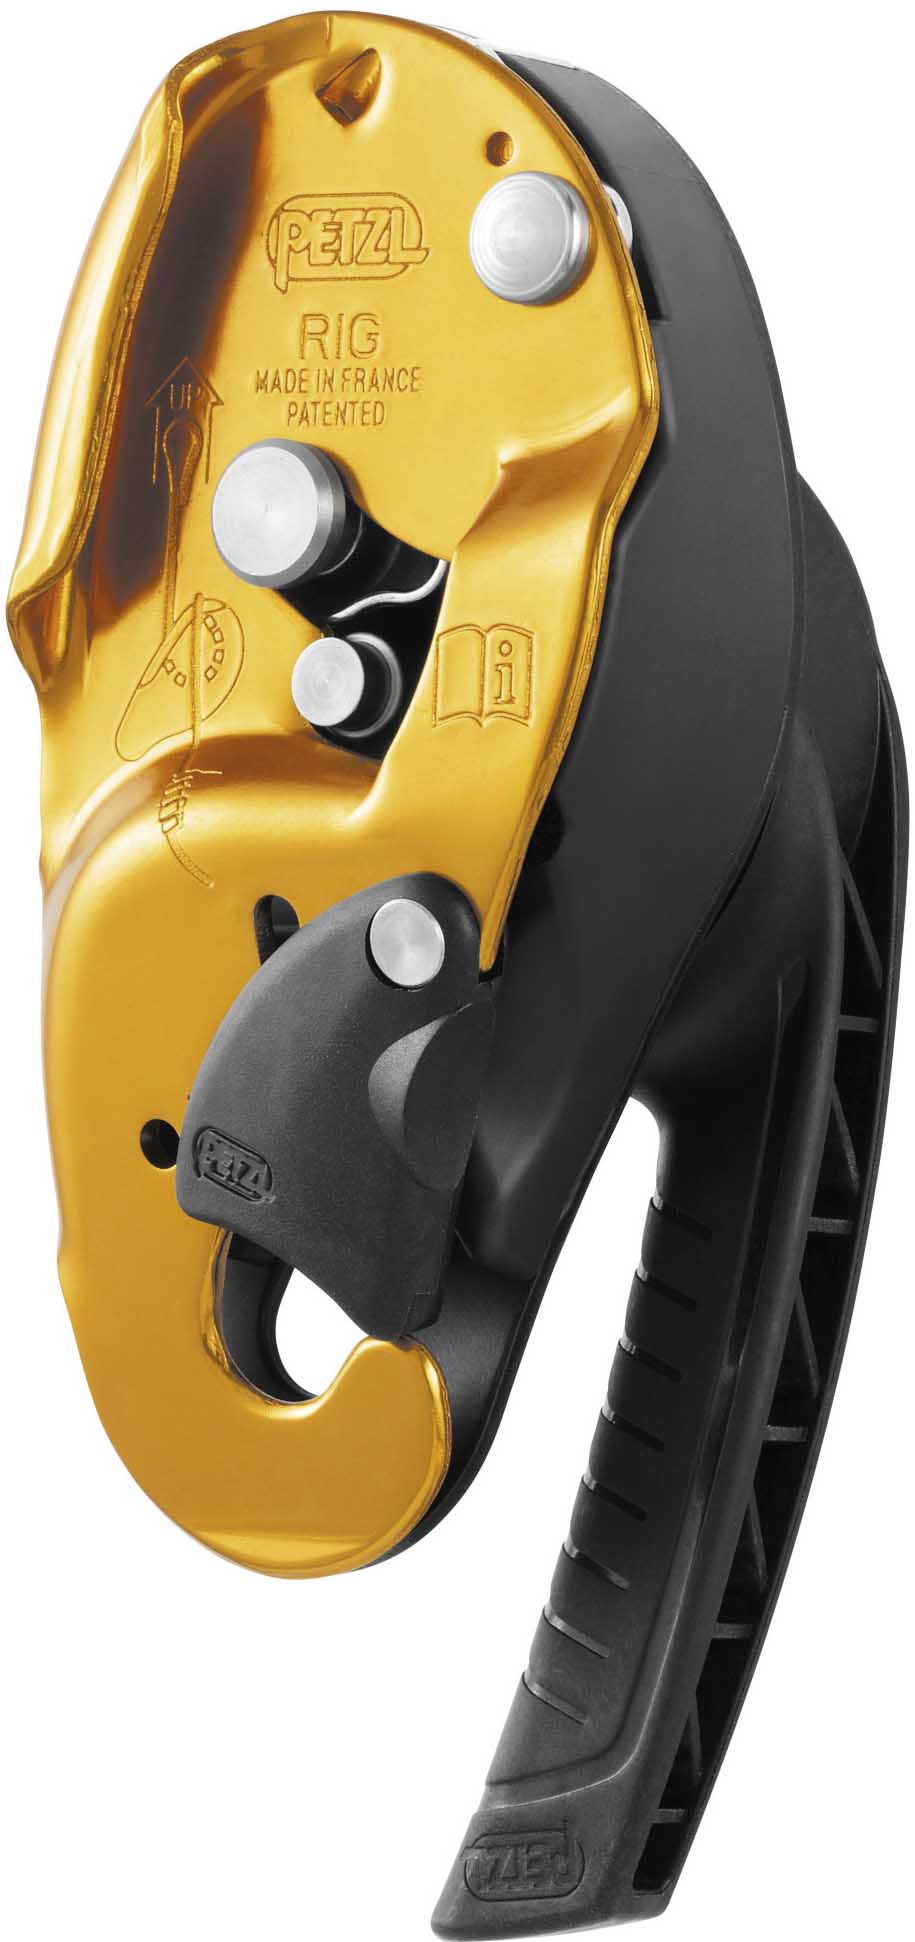 D21A Petzl Rig Compact Self-Braking Descender from GME Supply